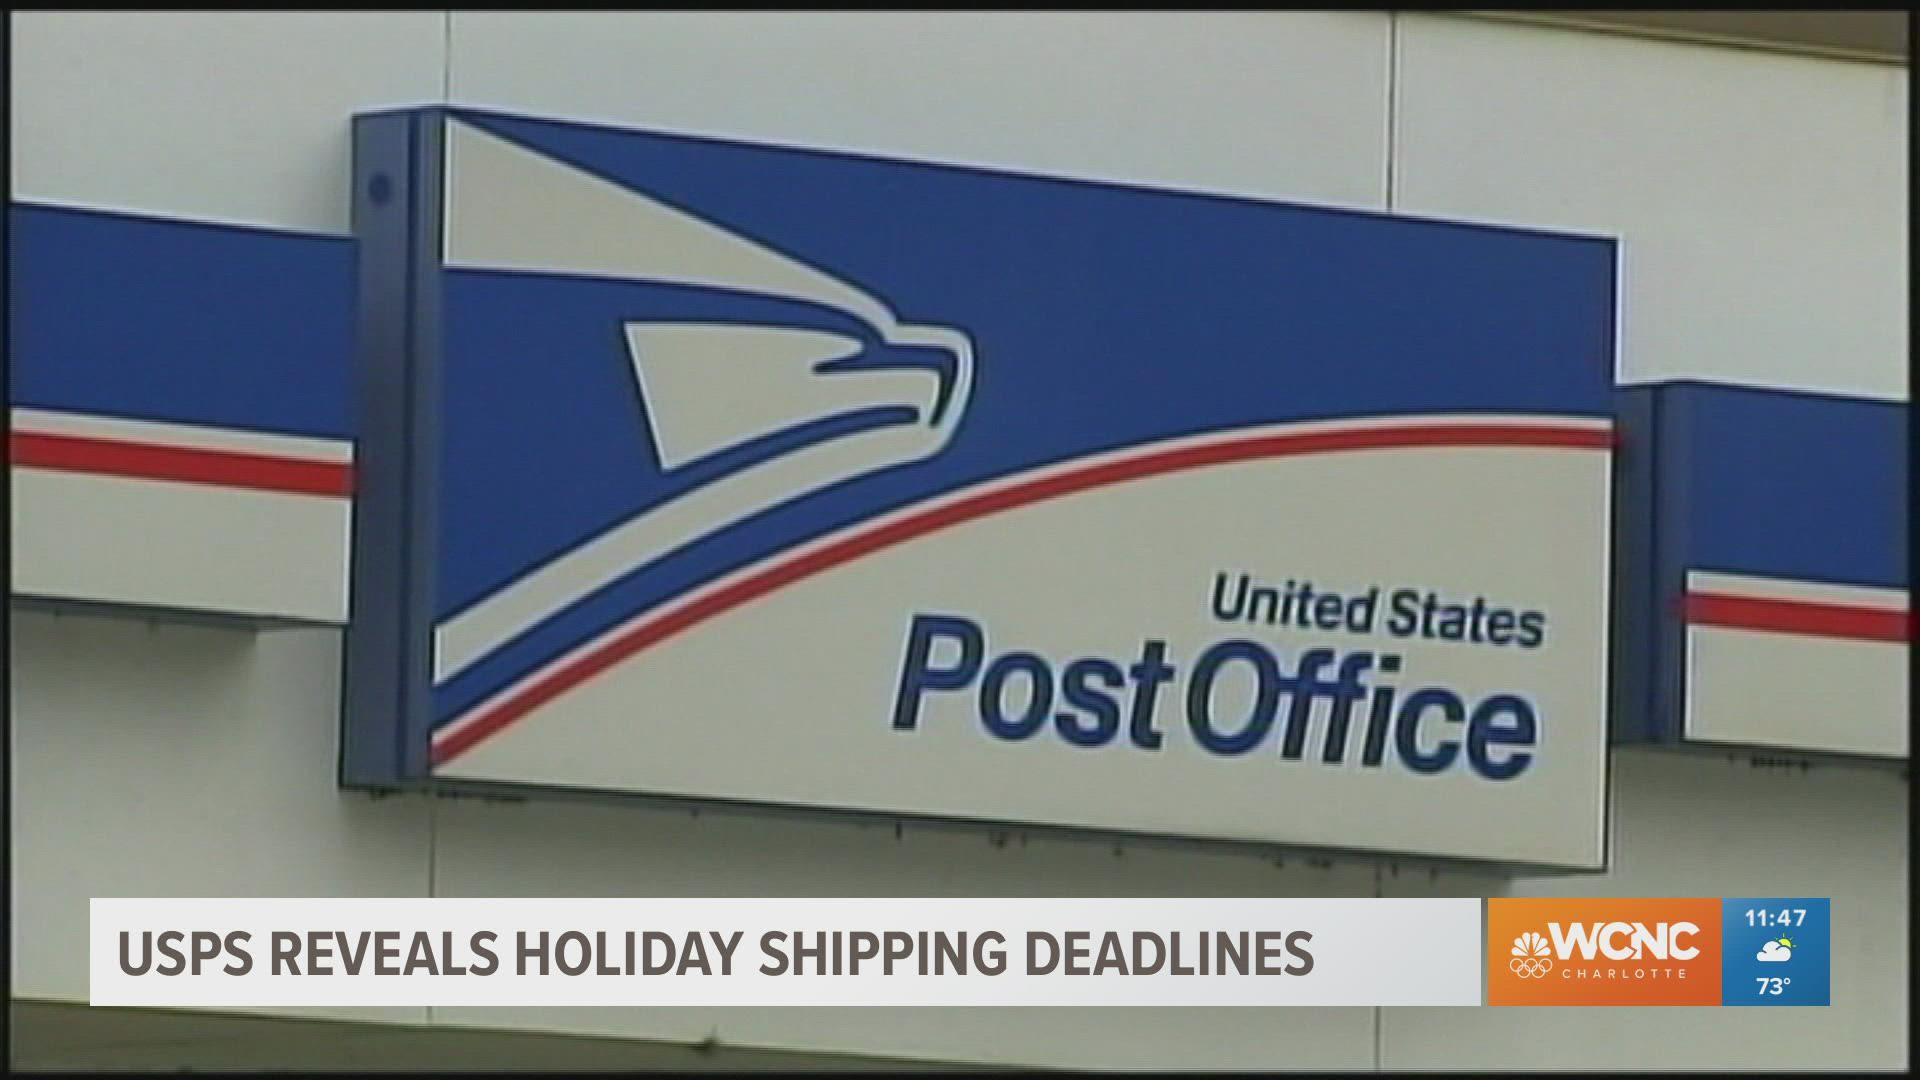 With new USPS changes and reported supply chain issues, getting your holiday gifts and cards in the mail on-time will be extra important this year.